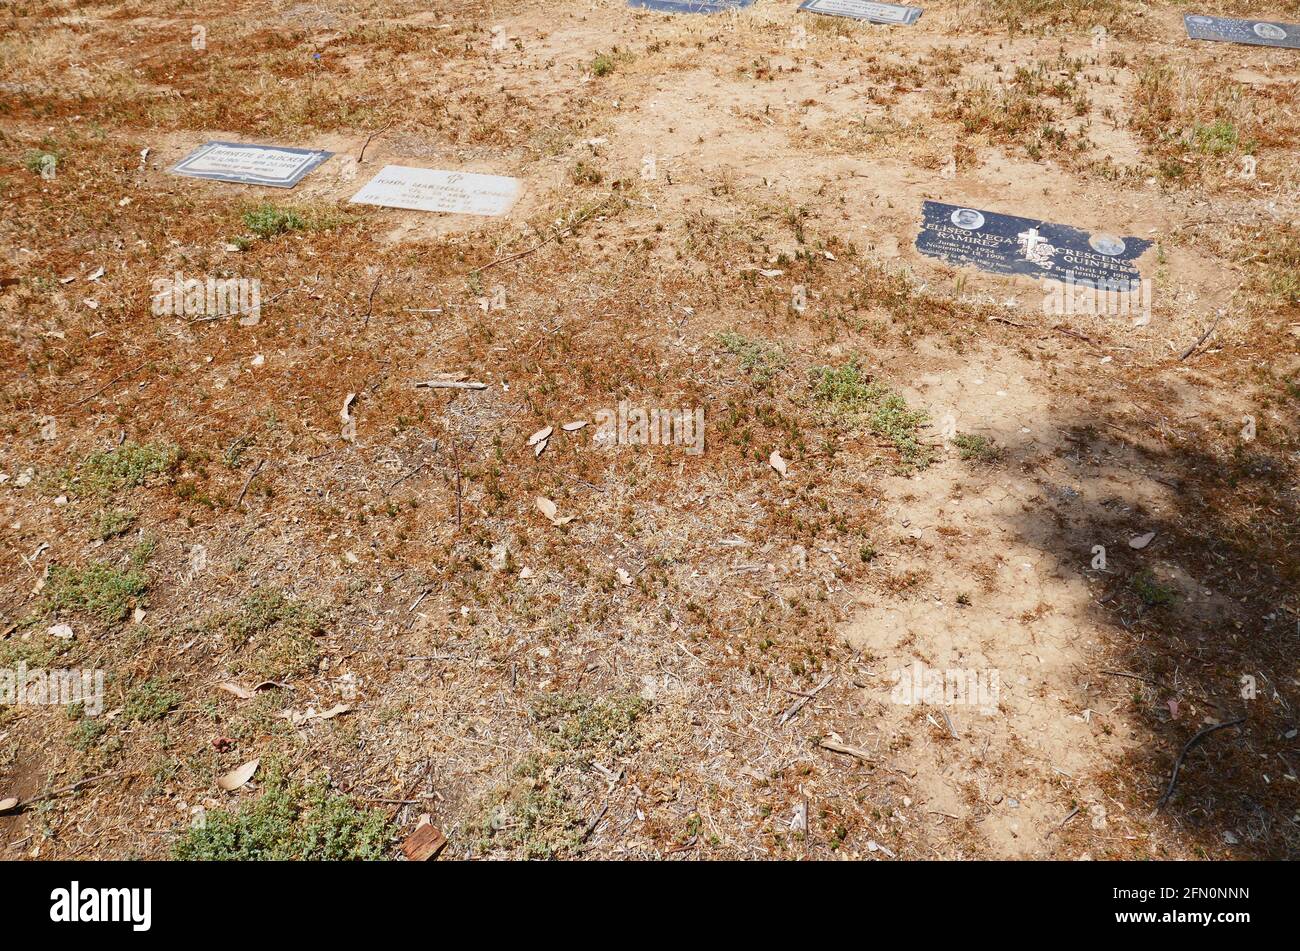 Los Angeles, California, USA 5th May 2021 A general view of atmosphere of Murderer Marvin Pentz Gay Sr's unmarked Grave, who killed his son Singer Marvin Gaye and is buried here at Evergreen Cemetery at 204 Evergreen Avenue on May 5, 2021 in Los Angeles, California, USA. Photo by Barry King/Alamy Stock Photo Stock Photo